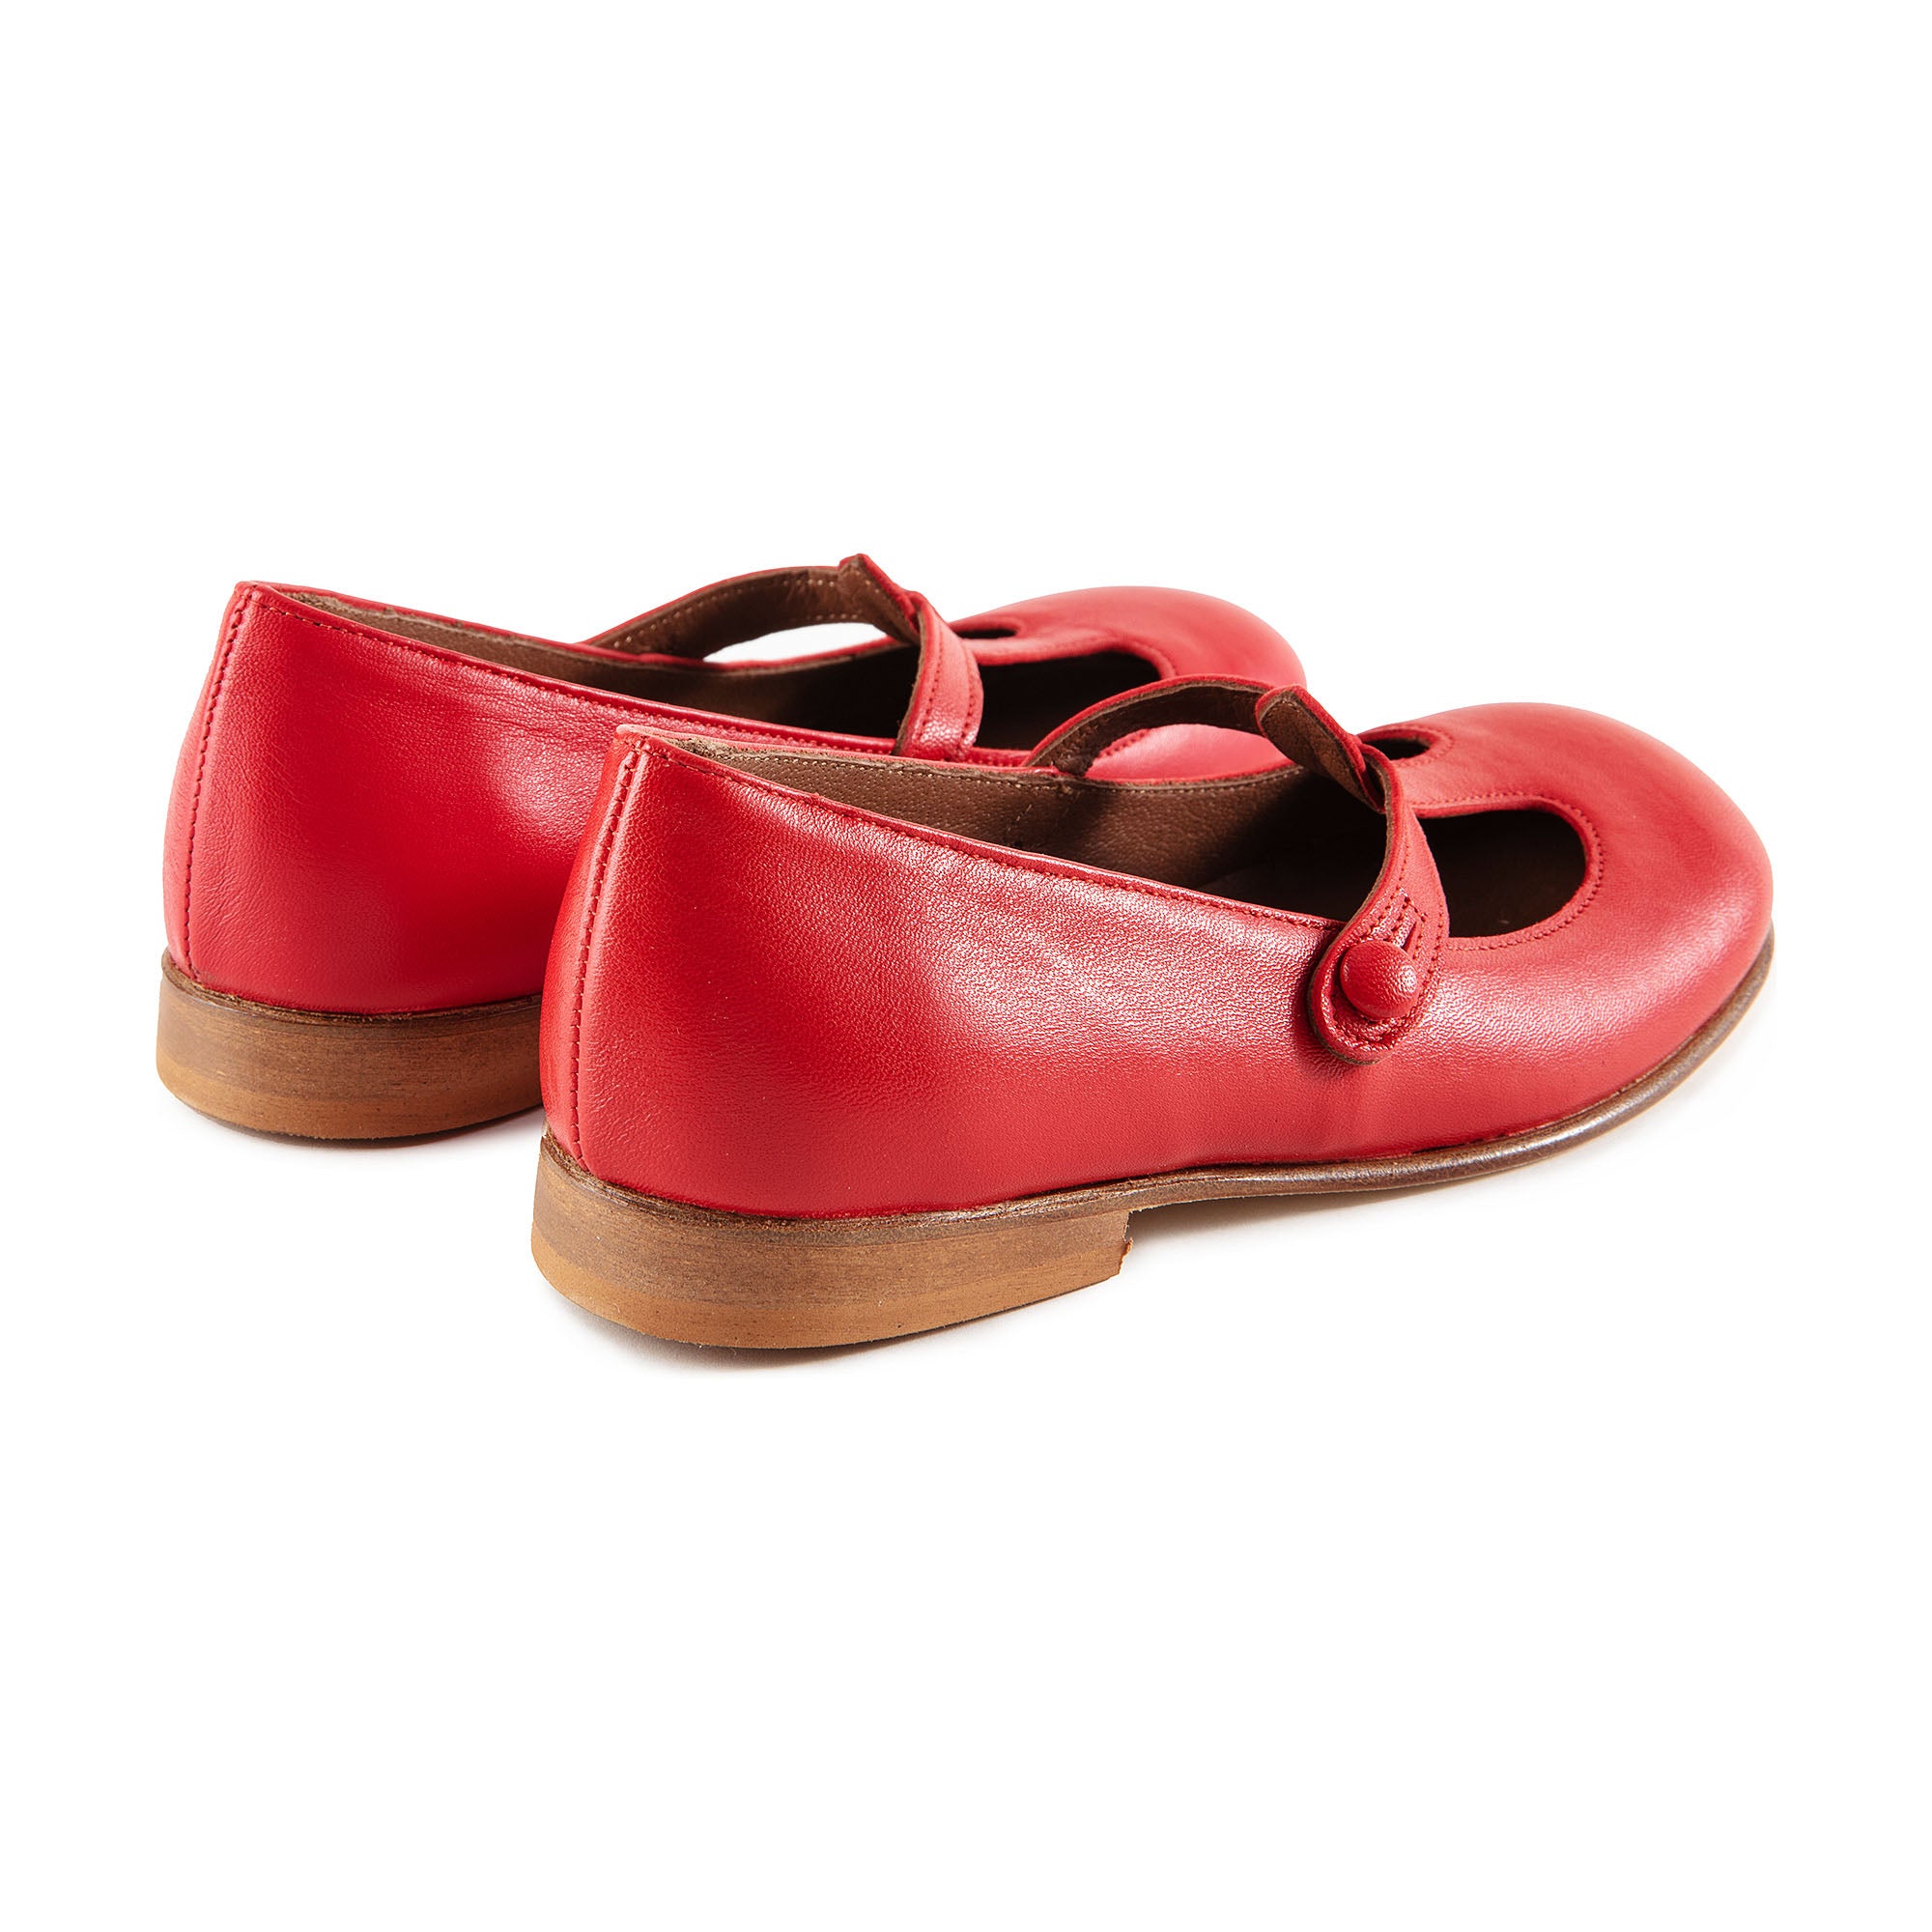 Boys & Girls Red Leather Sandals